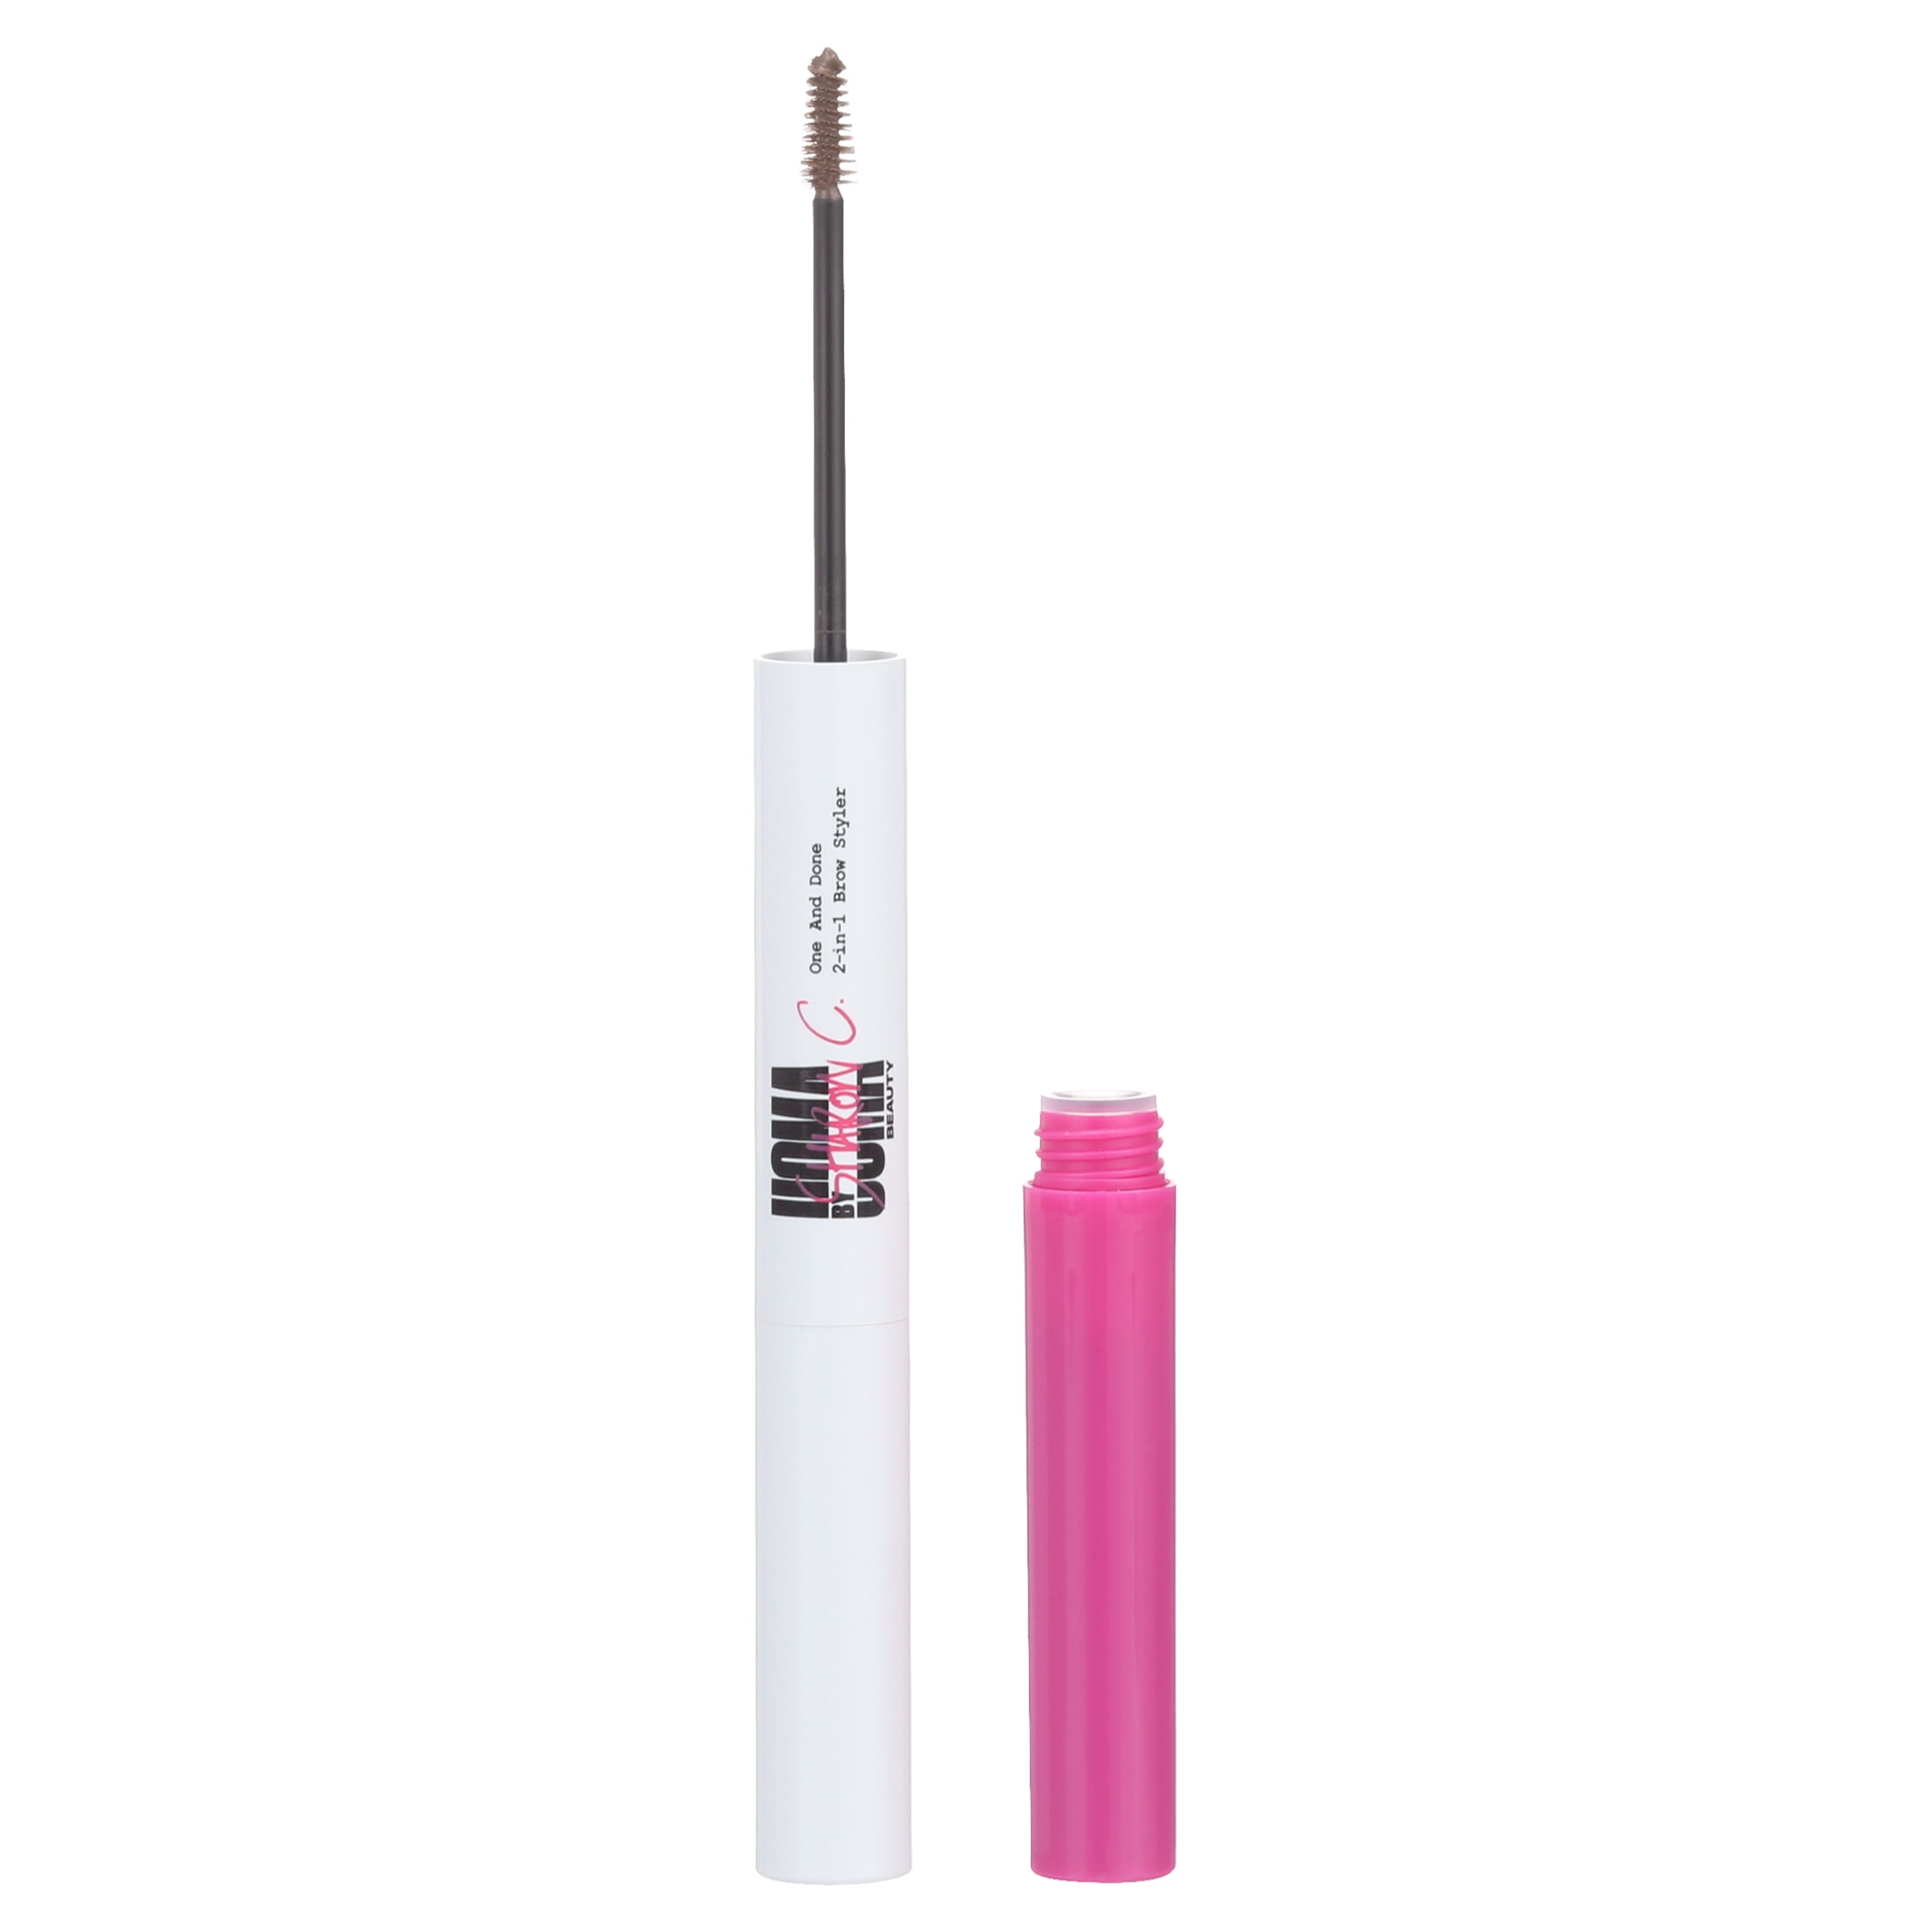 Uoma by Sharon C, One and Done Complete Brow Styler Pen Shade 5 Brunette